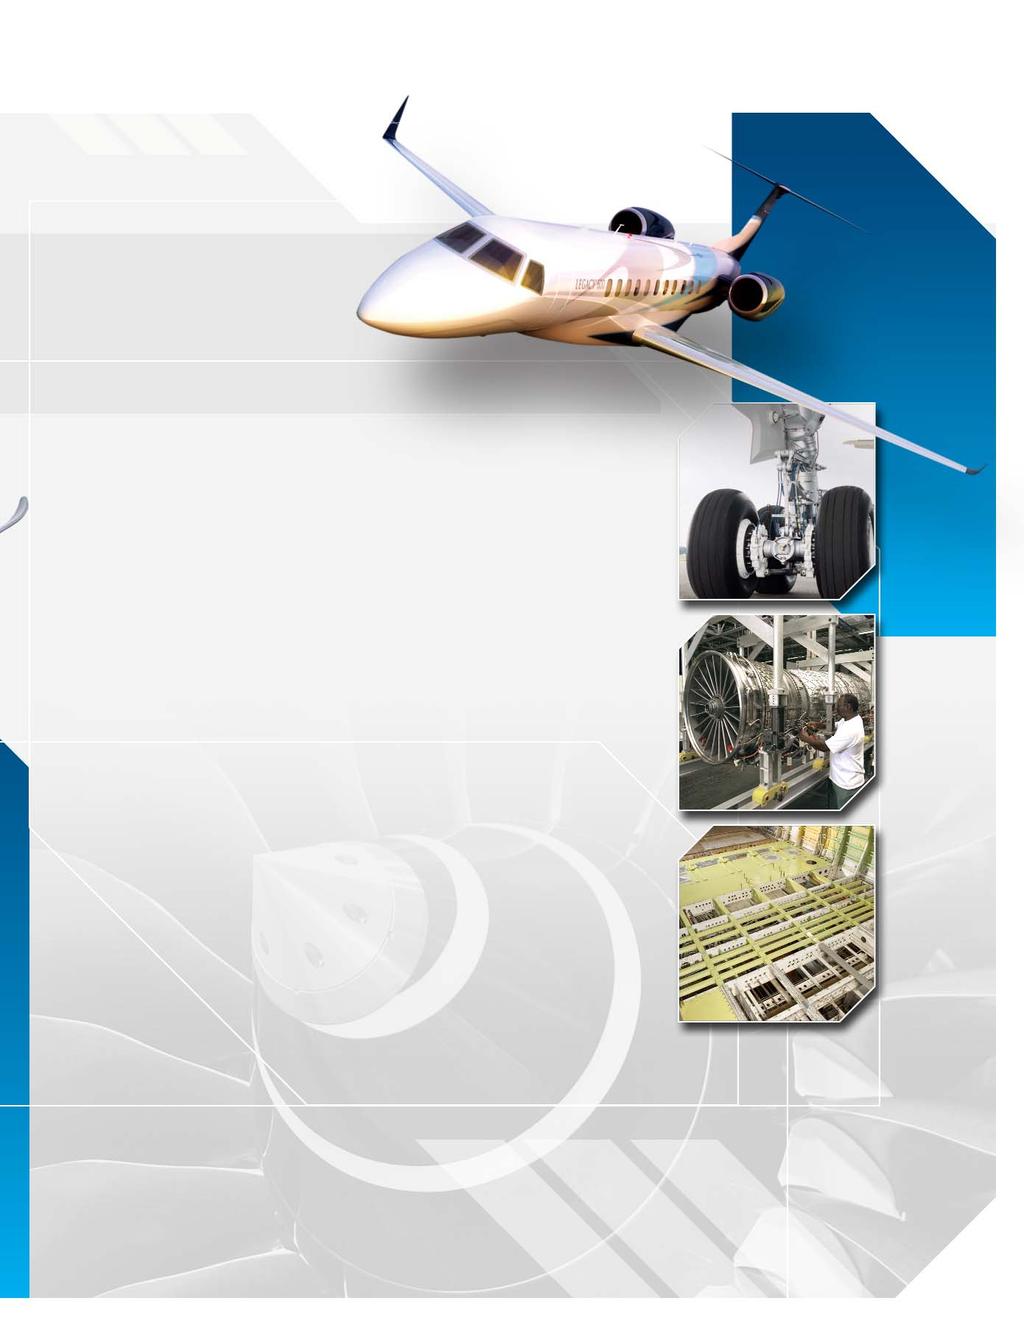 ATI Aerospace A New Resource ATI Aerospace integrates Allegheny Technologies Incorporated (ATI) historic aerospace capabilities to offer our aerospace customers a variety of proven metallic and